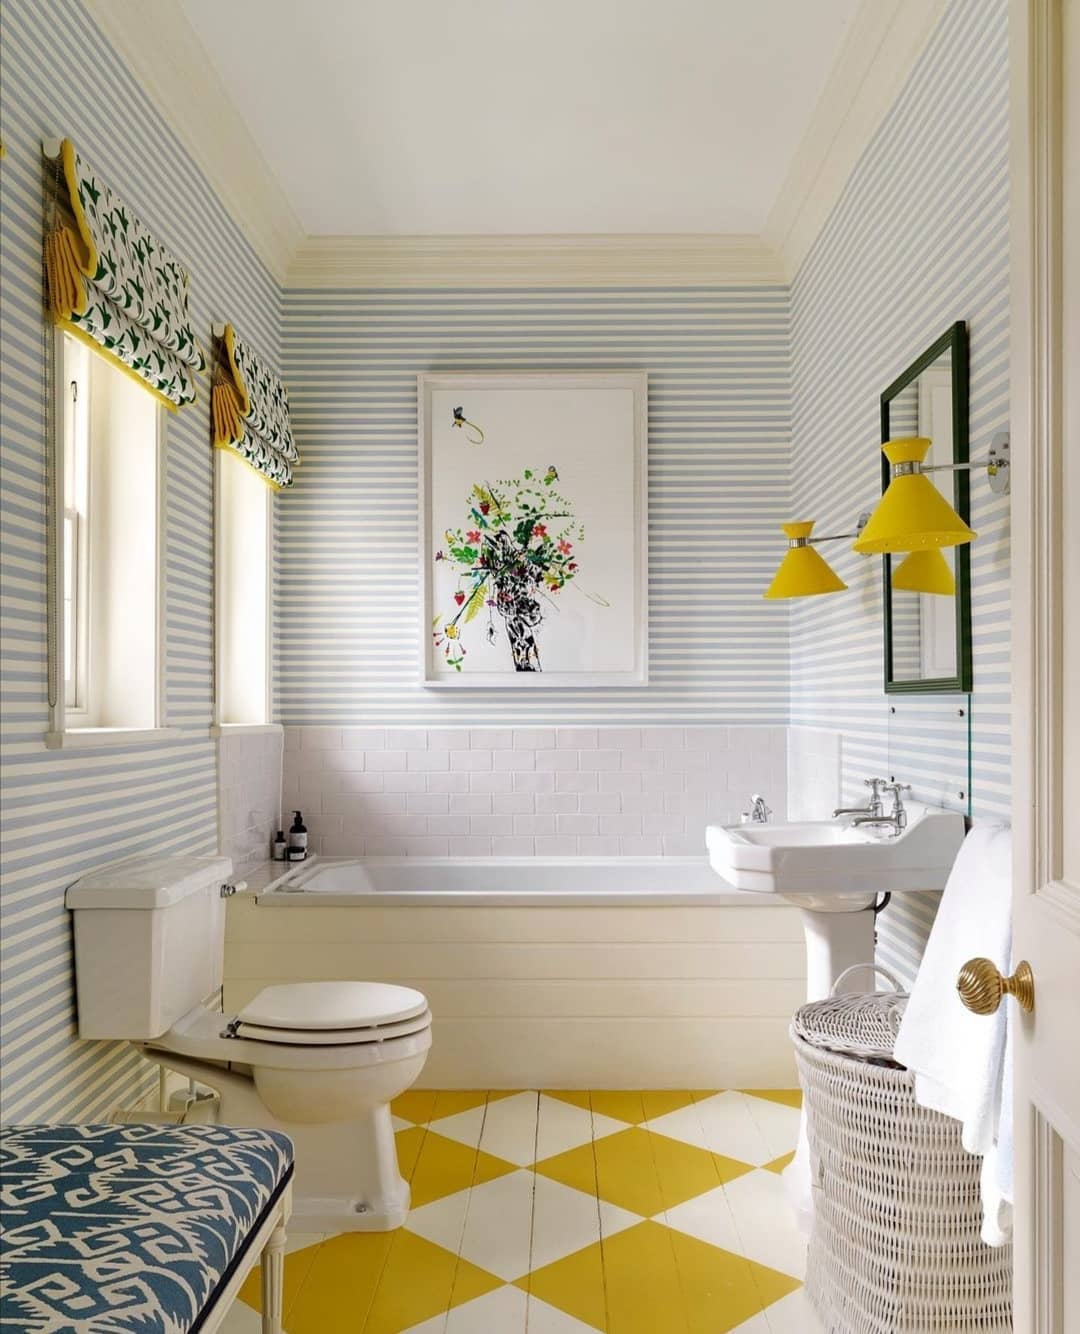 Updated Bathroom With Striped Wallpaper and White and Yellow Diamond Flooring. Photo by Instagram user @countryfurnishings